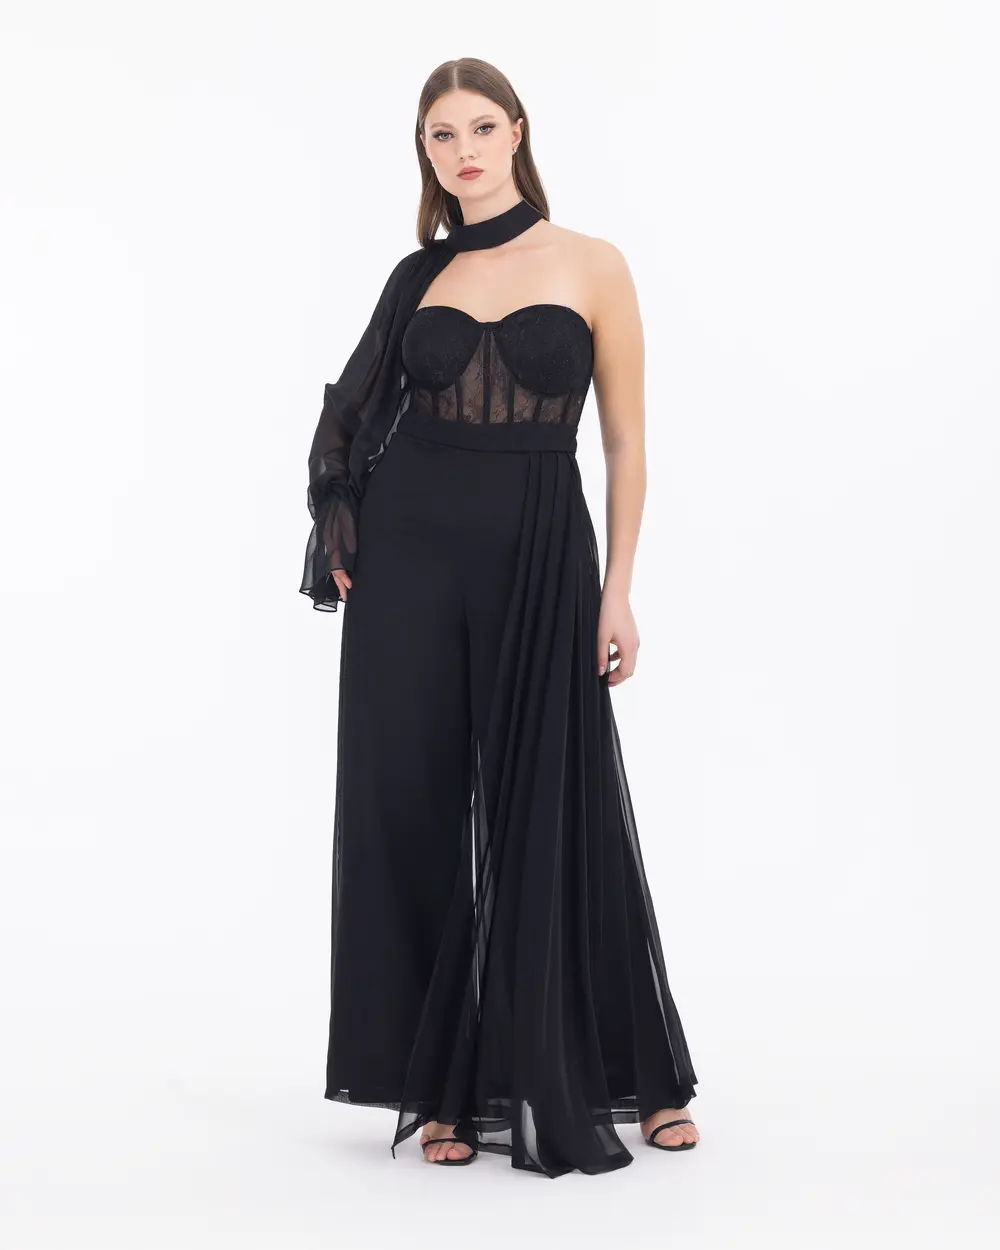 Bust Cup Detachable Sleeve Lace Evening Dress